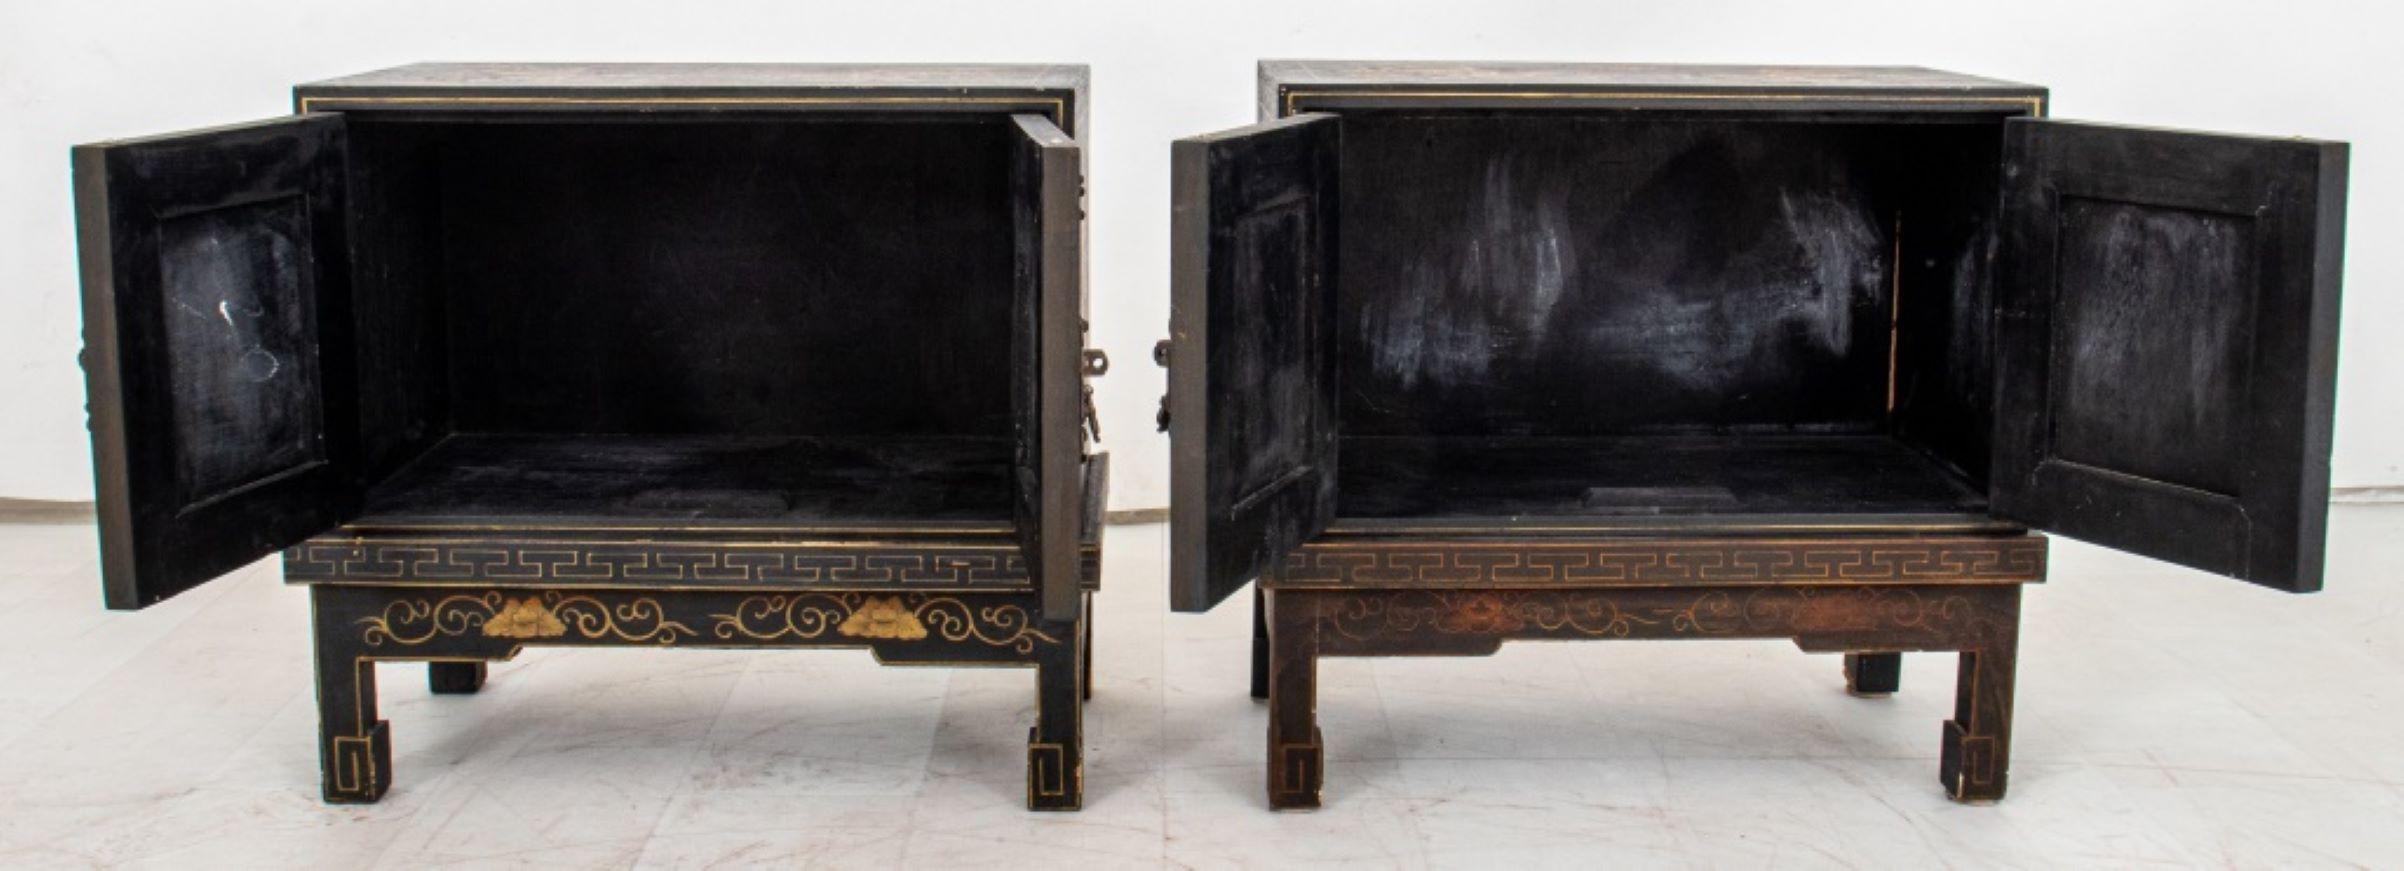 Chinoiserie Black and Gilt Decorated Cabinets, 2 In Good Condition For Sale In New York, NY